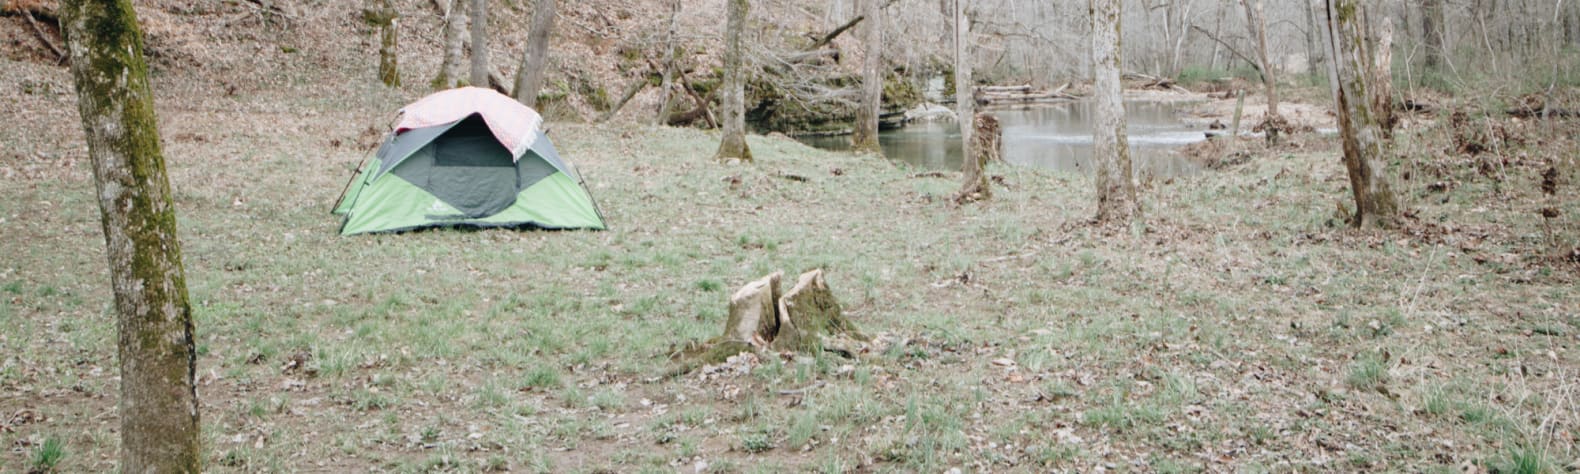 Camping by the Creek